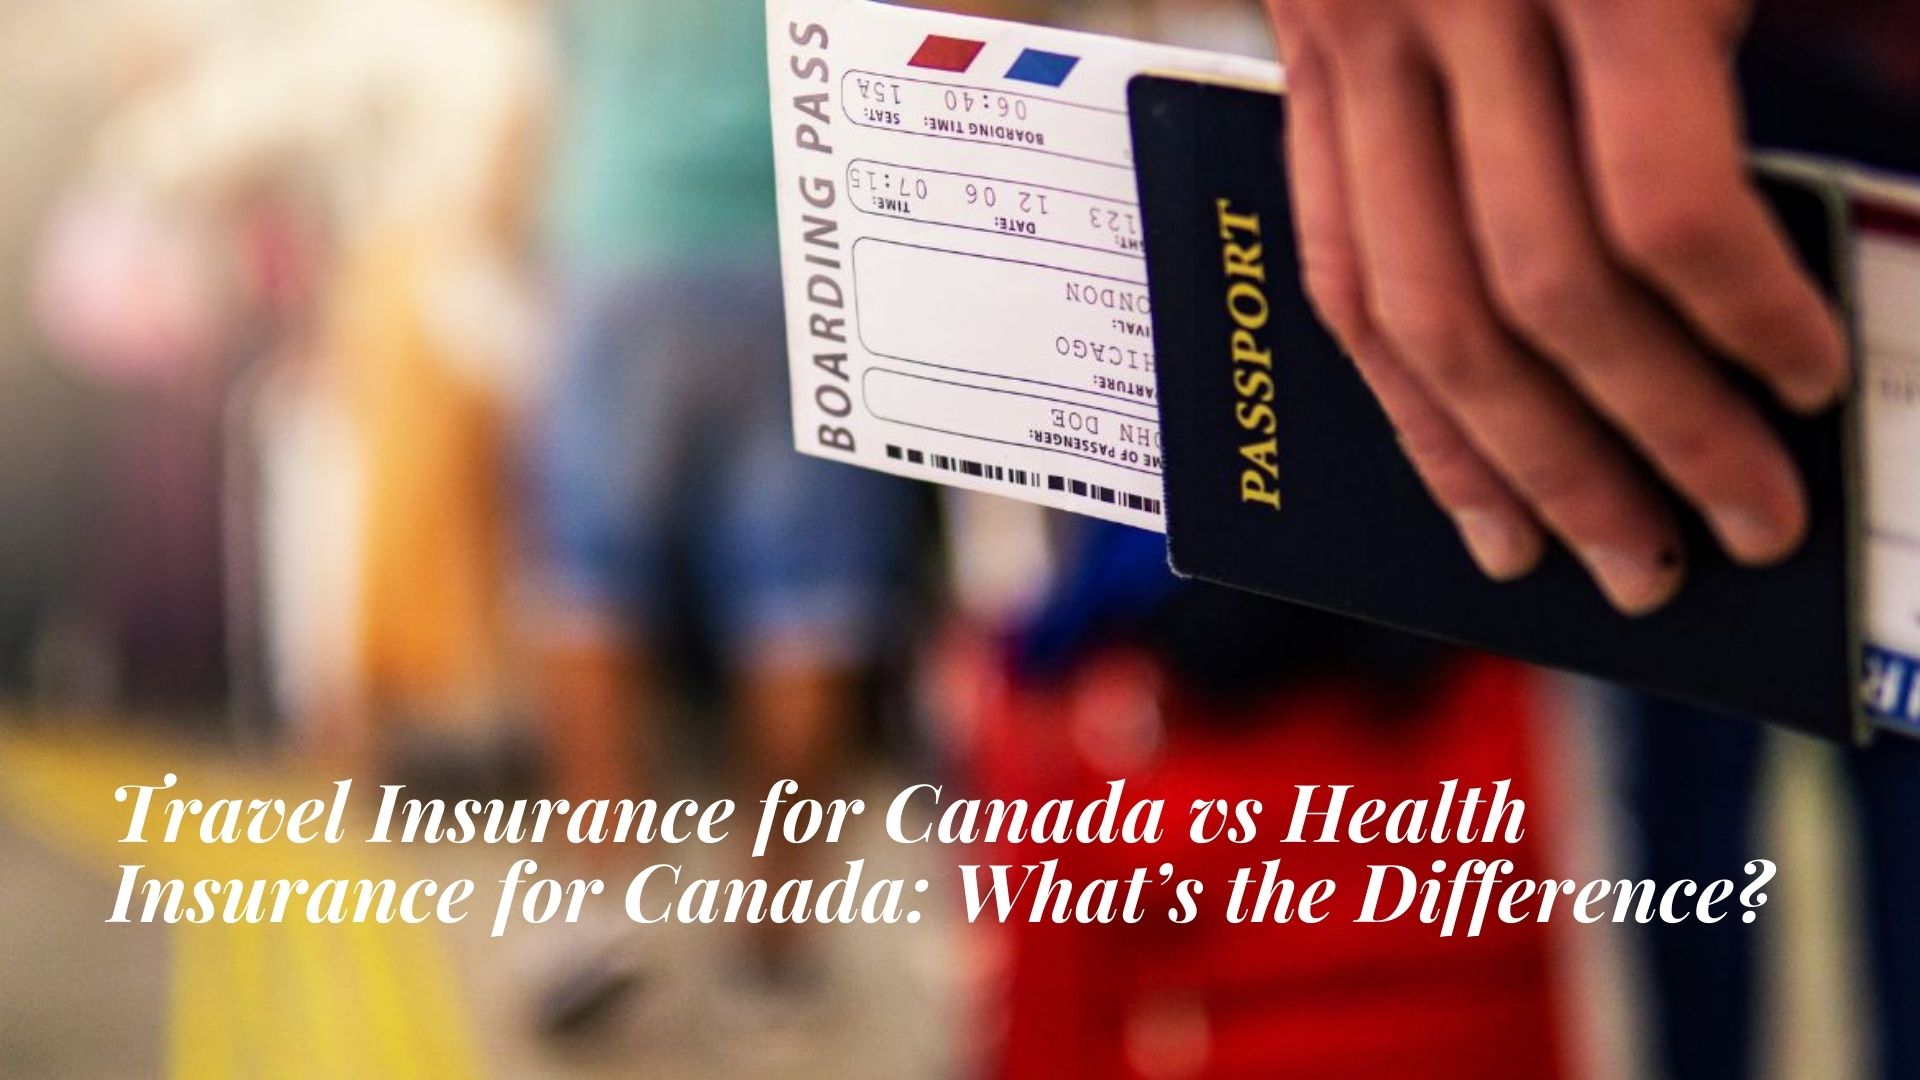 Travel Insurance for Canada vs Health Insurance for Canada: What’s the Difference?